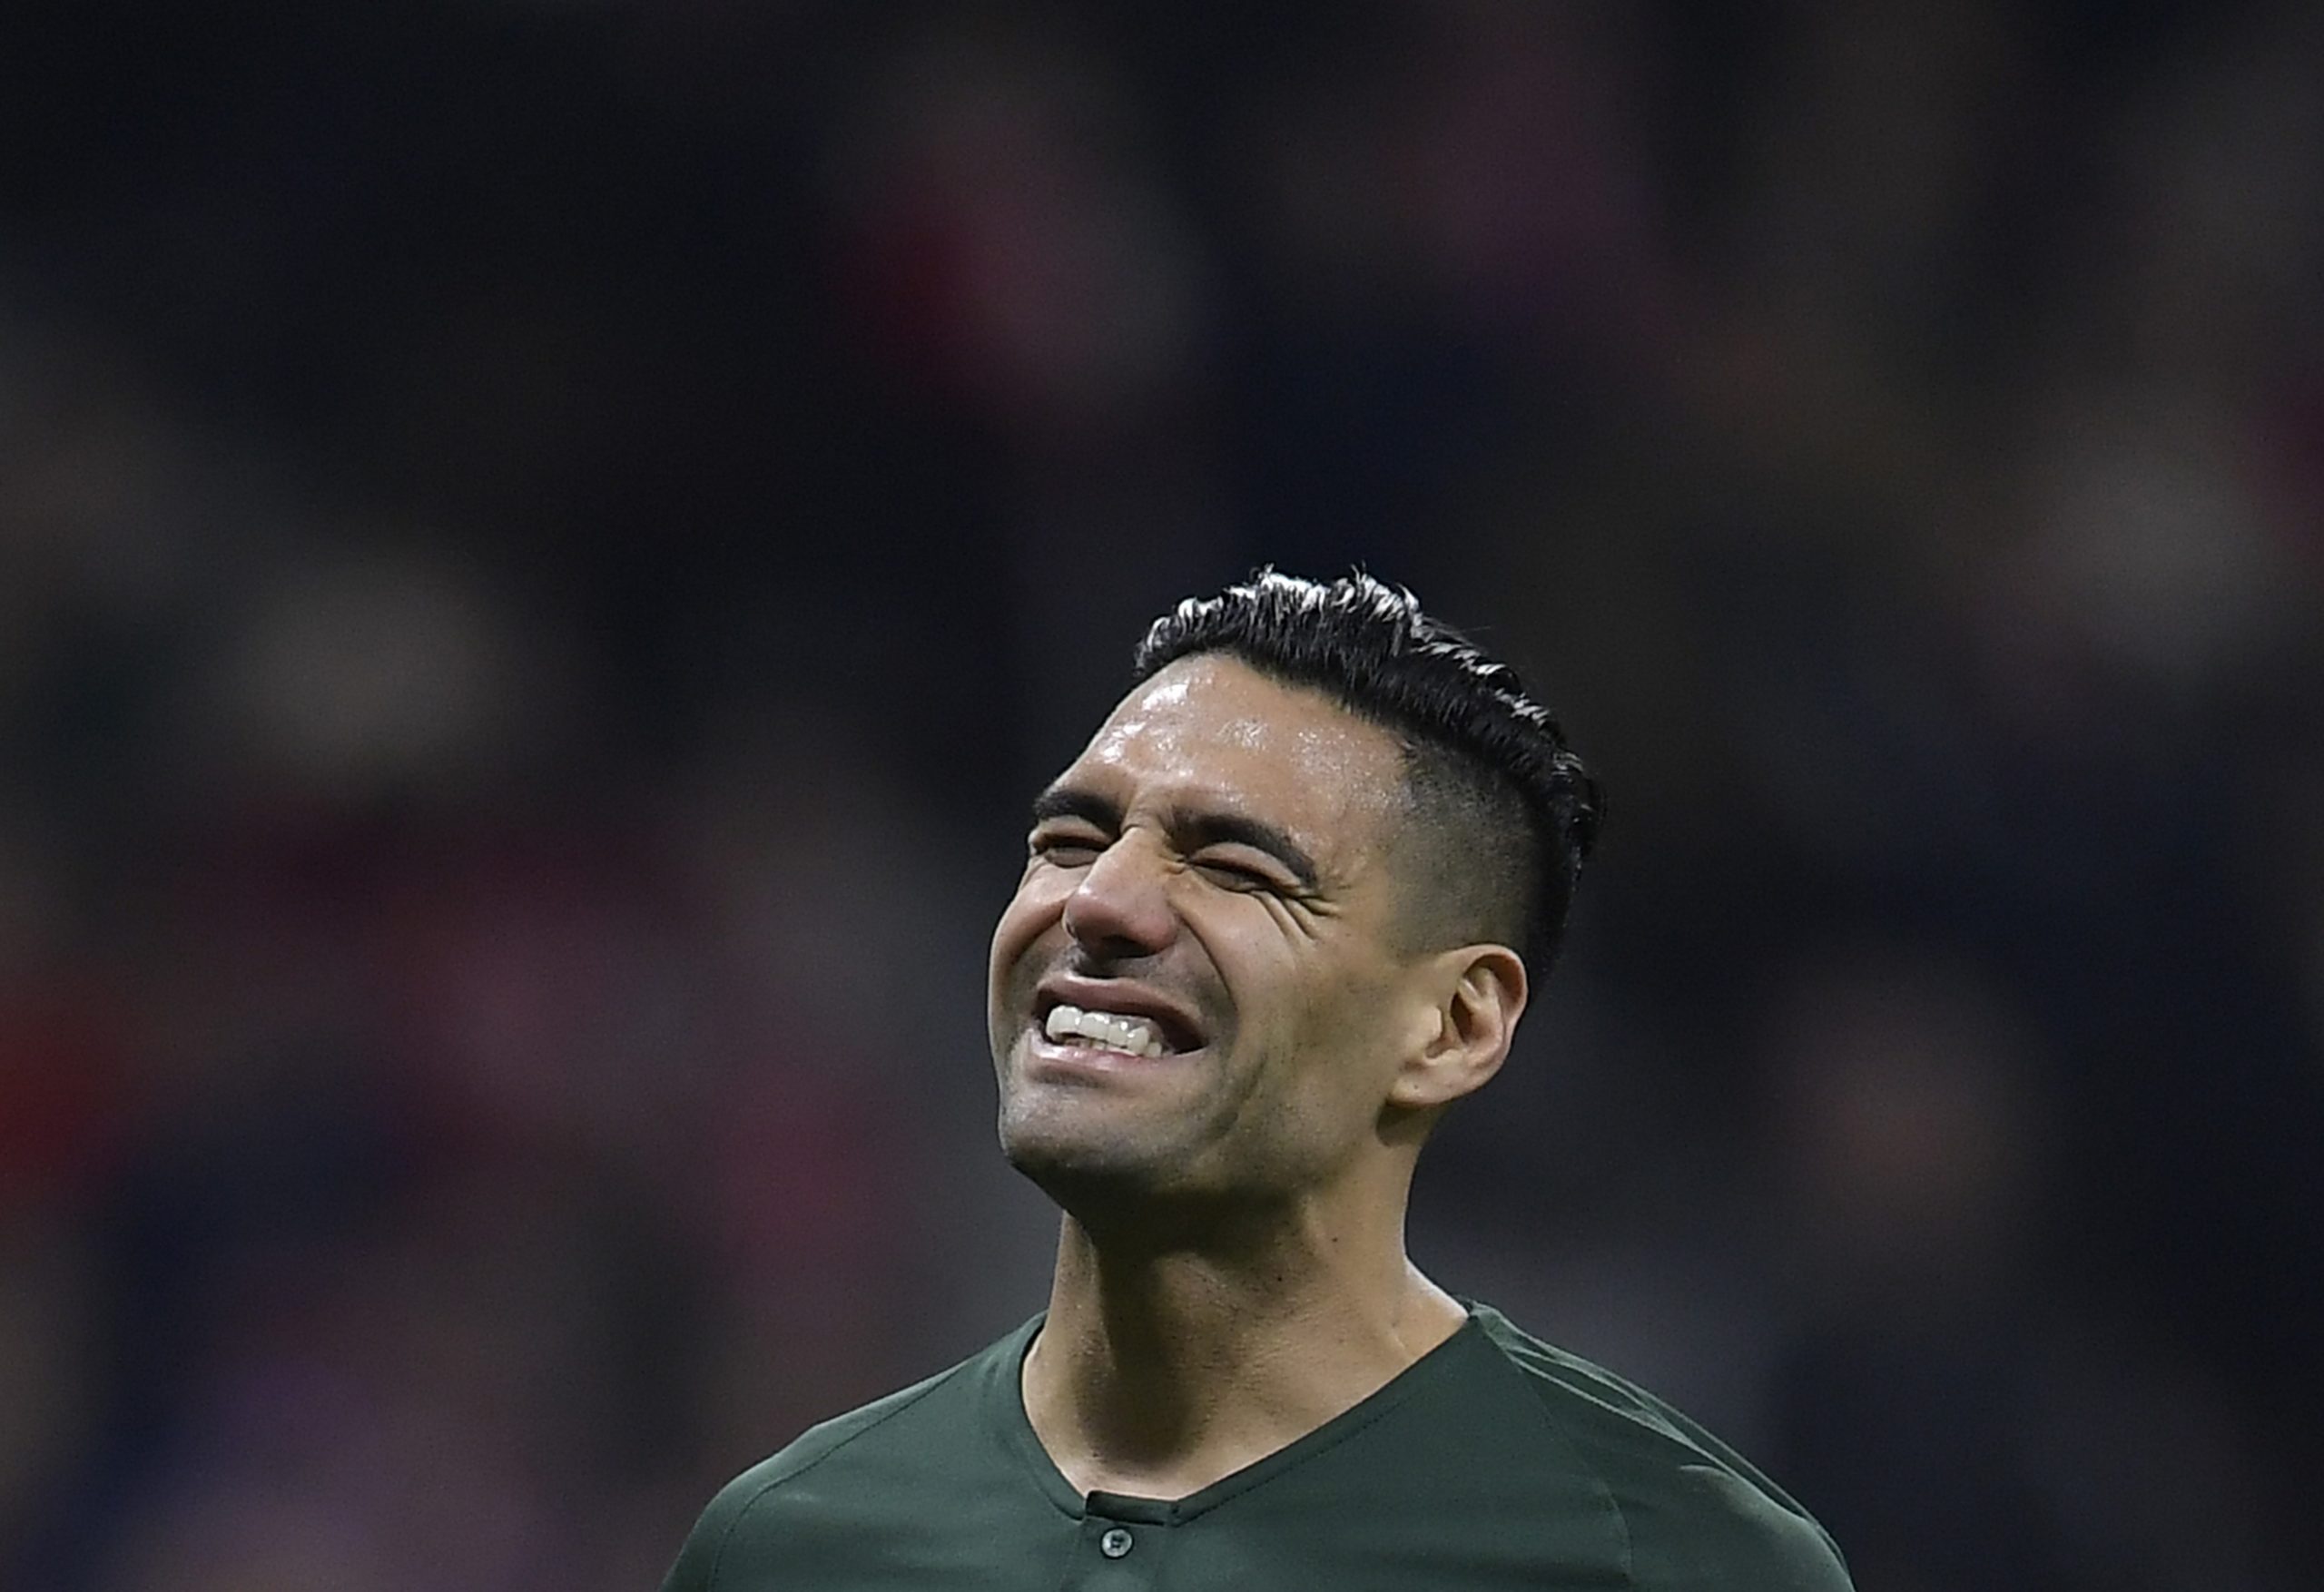 Monaco's Colombian forward Radamel Falcao reacts after missing a penalty kick during the UEFA Champions League group A football match between Atletico Madrid and Monaco at the Wanda Metropolitan stadium in Madrid on November 28, 2018. (Photo by OSCAR DEL POZO / AFP)